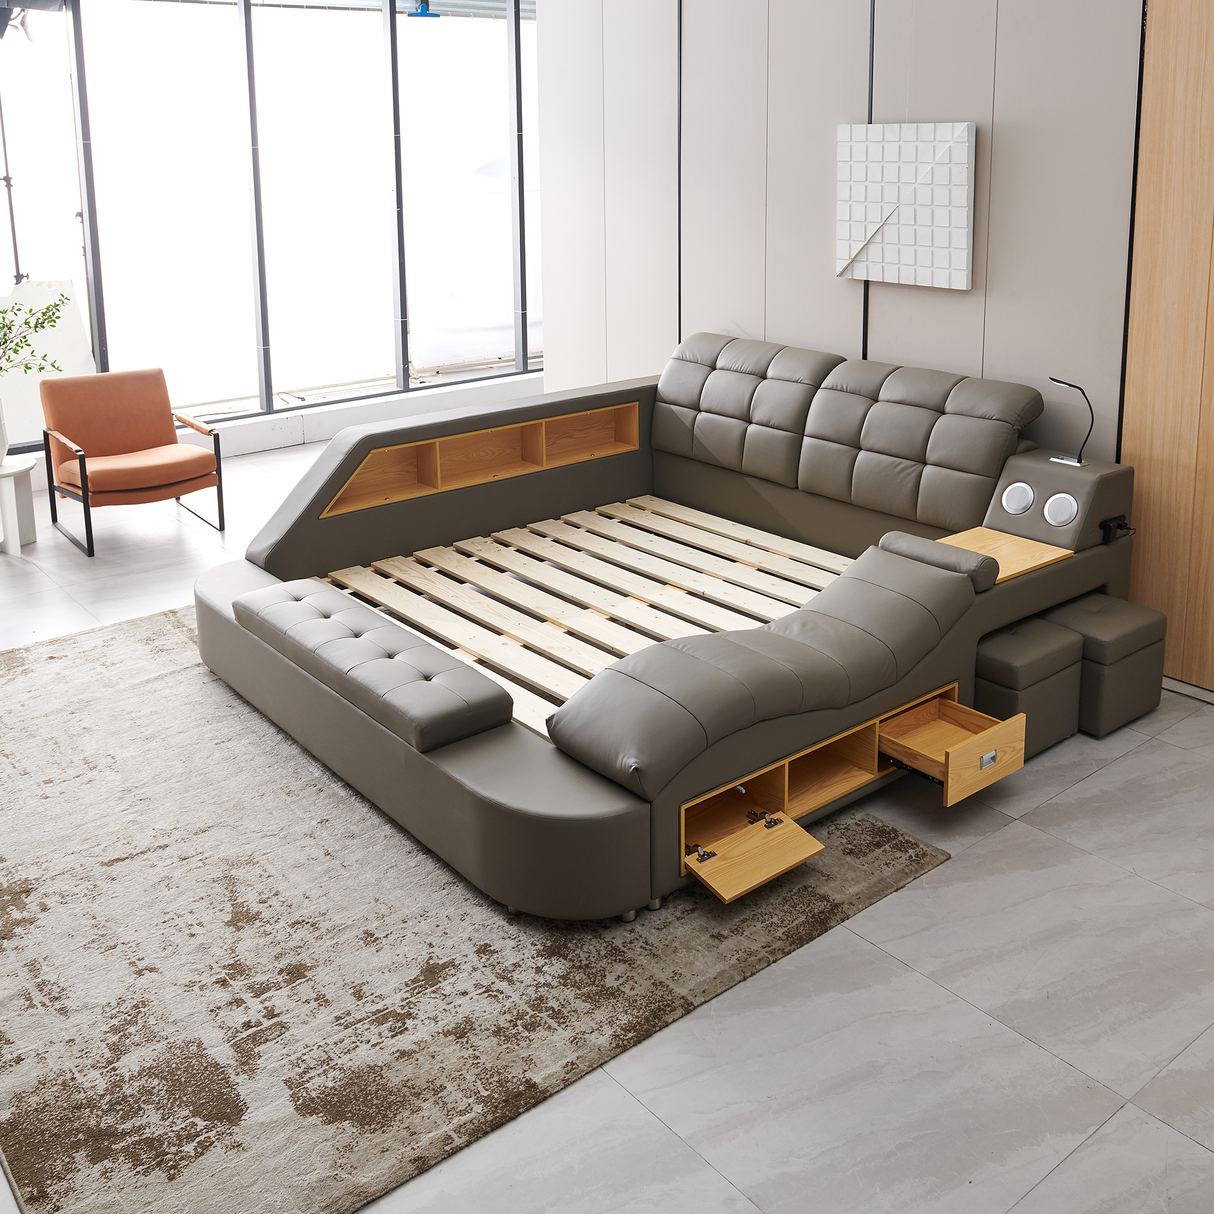 Multifunctional Upholstered Storage Bed Frame, Massage Chaise Lounge on Left, Queen Size, Grey - Home Elegance USA